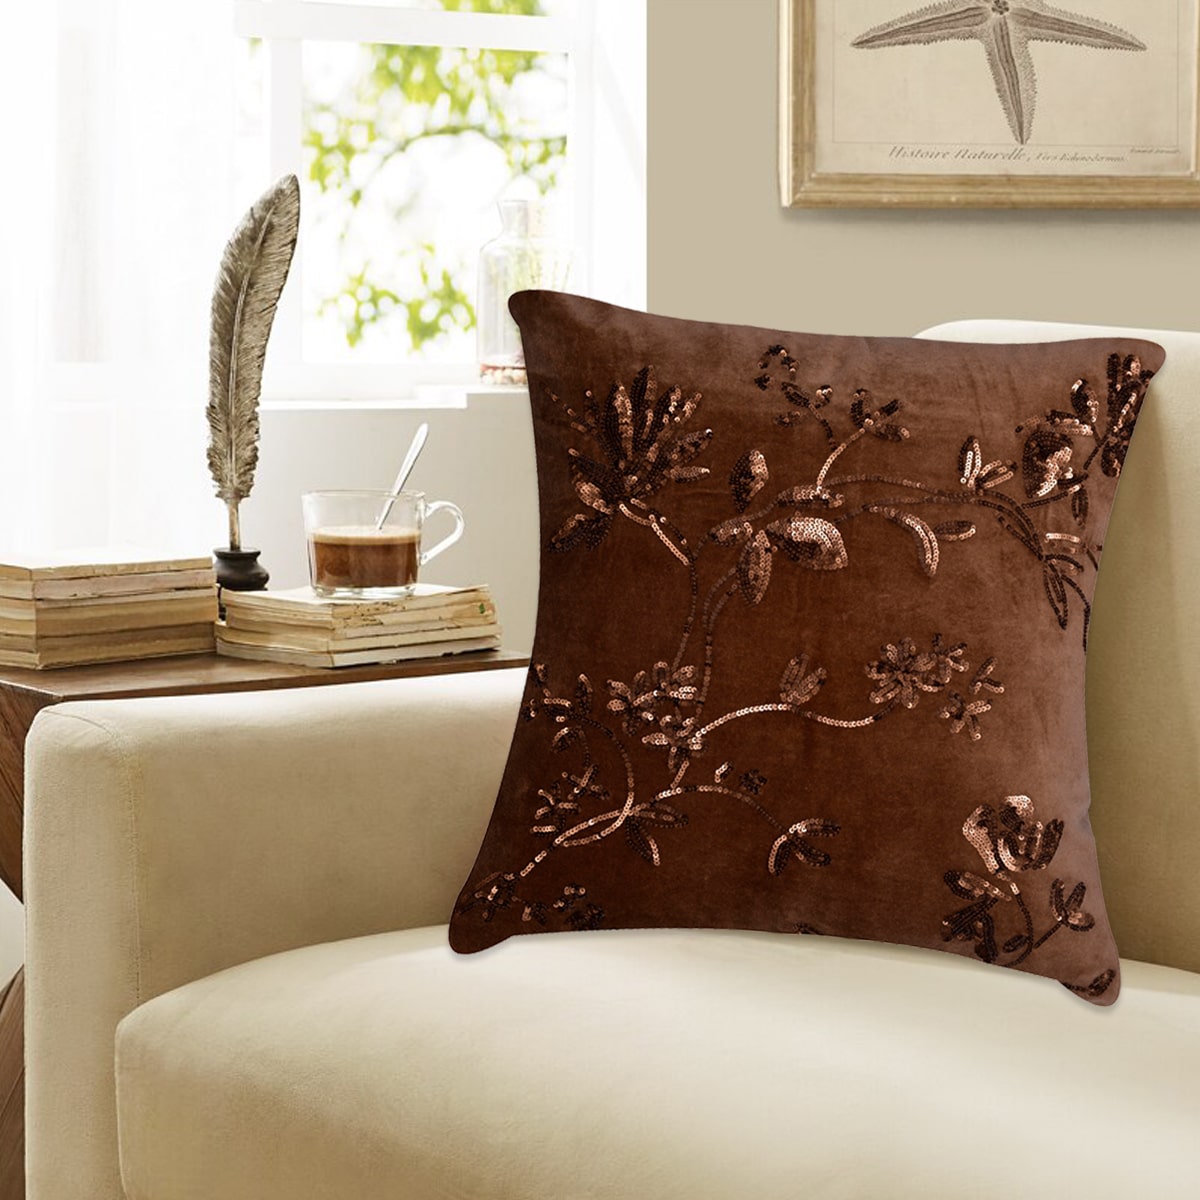 Brown Throw Pillow Covers - Set of 2 and 4, 18 x 18 inches - Decozen